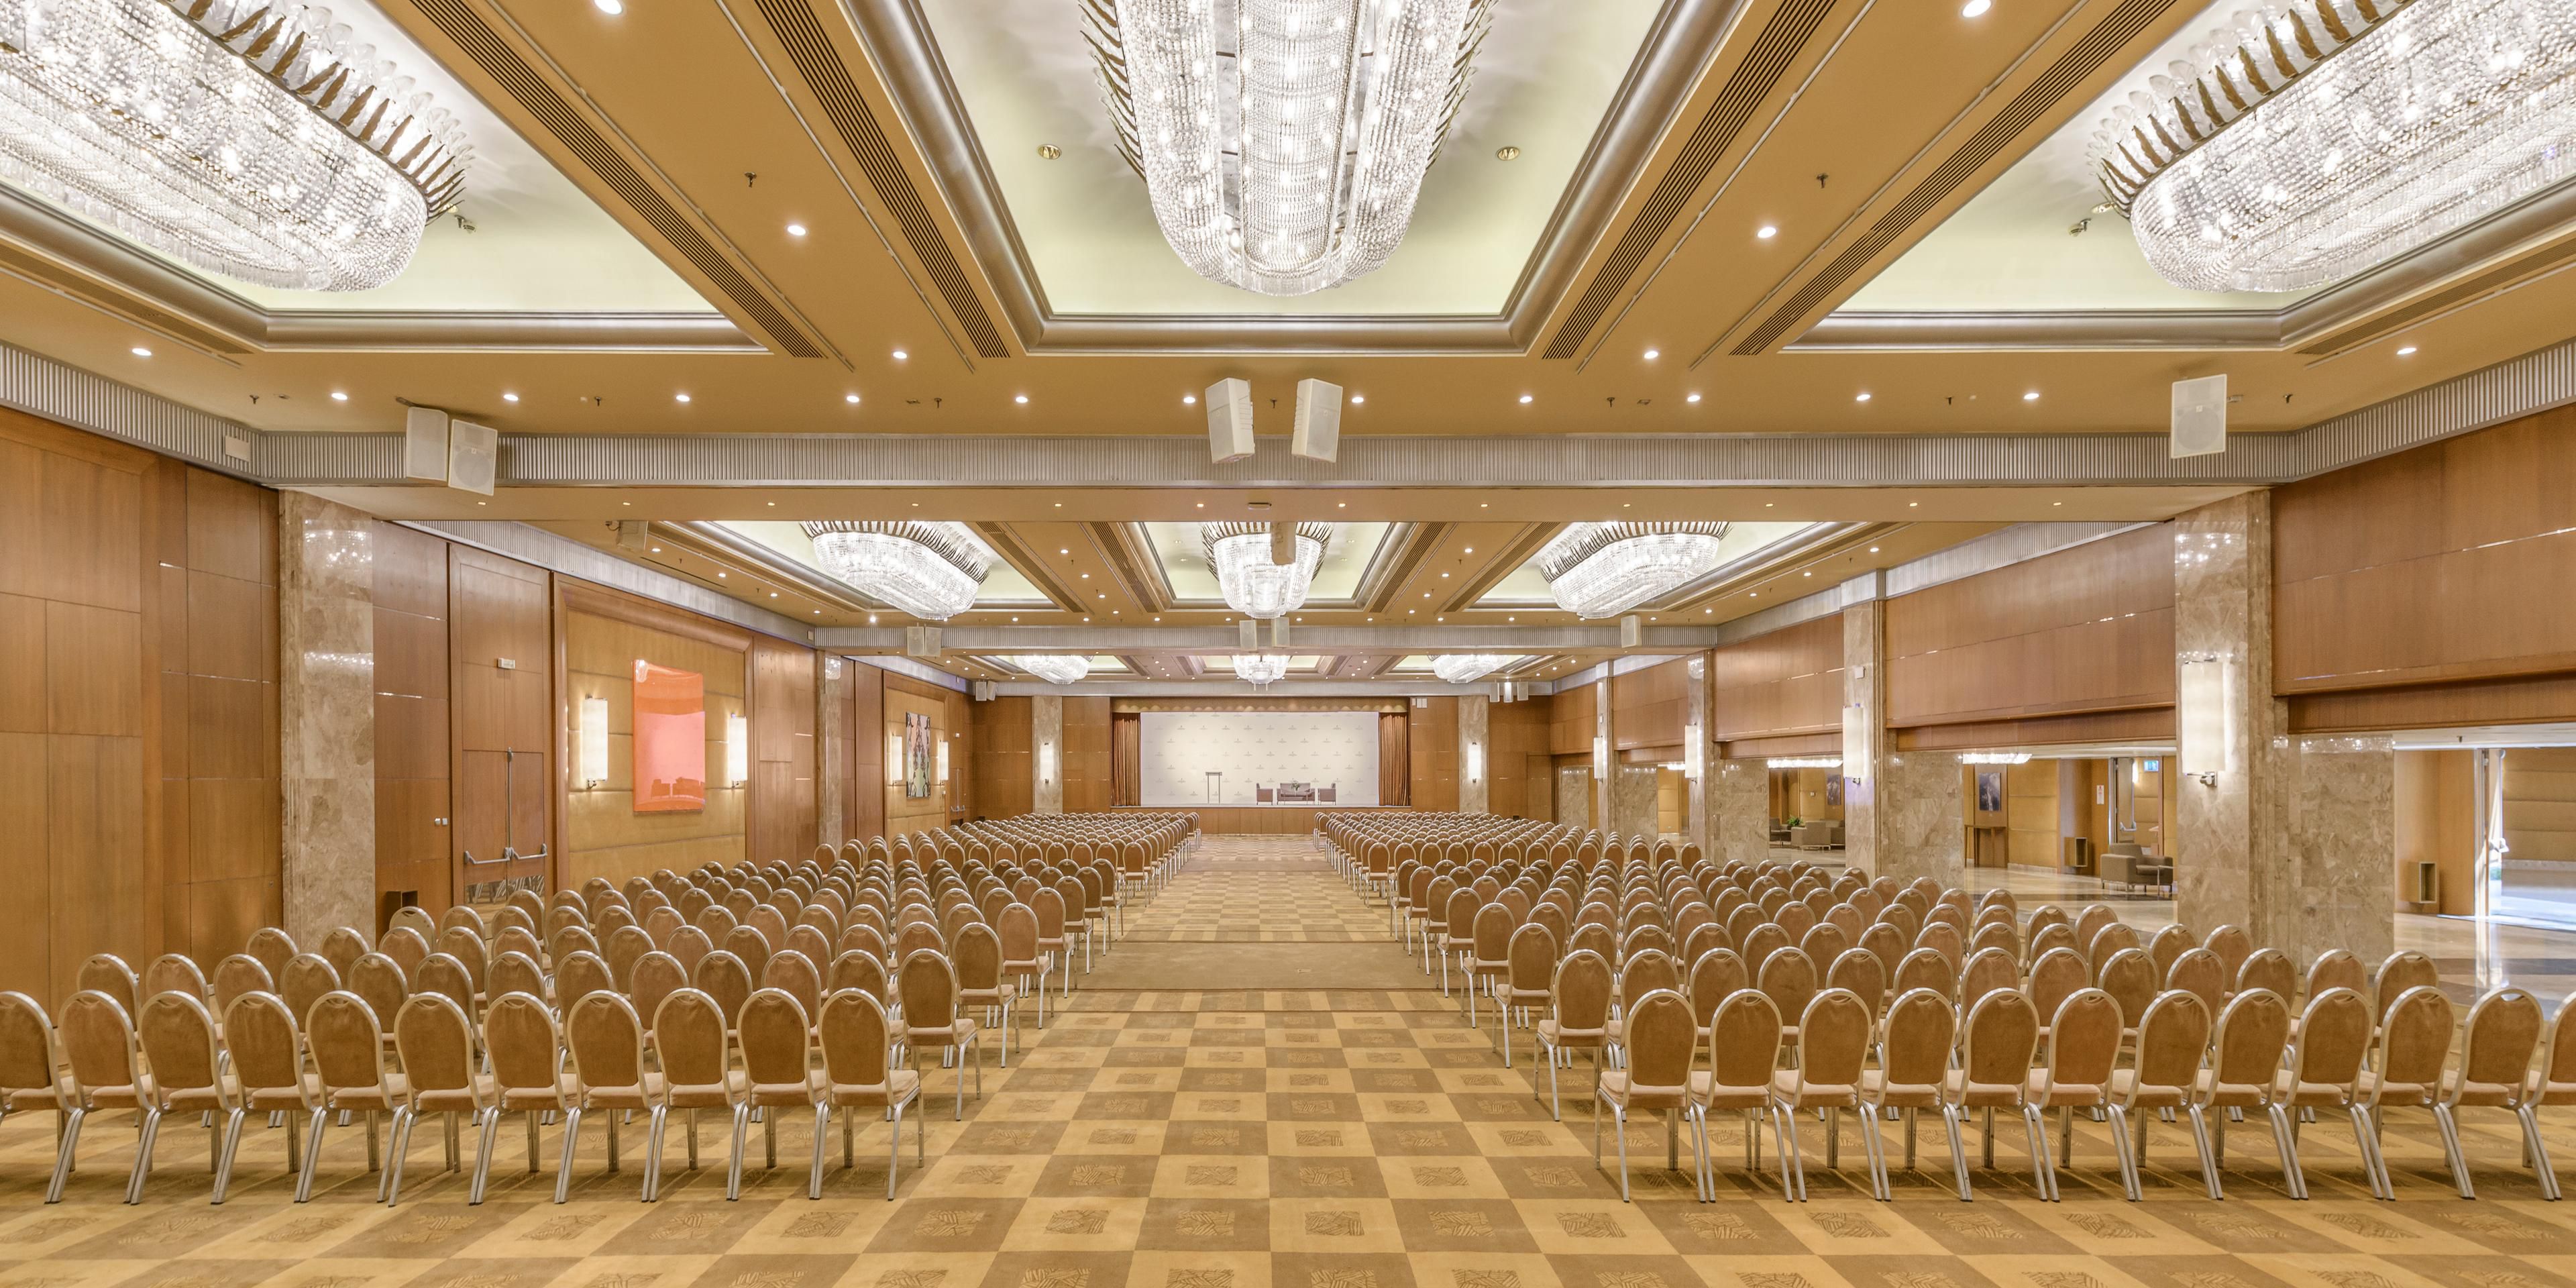 Host your Athens event in our elegant Athenaeum Ballroom, the largest column-free ballroom in Athens, accommodating up to 1,500 guests. With 3,500 square metres of versatile space, 35 breakout rooms and extensive branding opportunities, our state-of-the-art facilities and cutting-edge technology ensure your event's success.